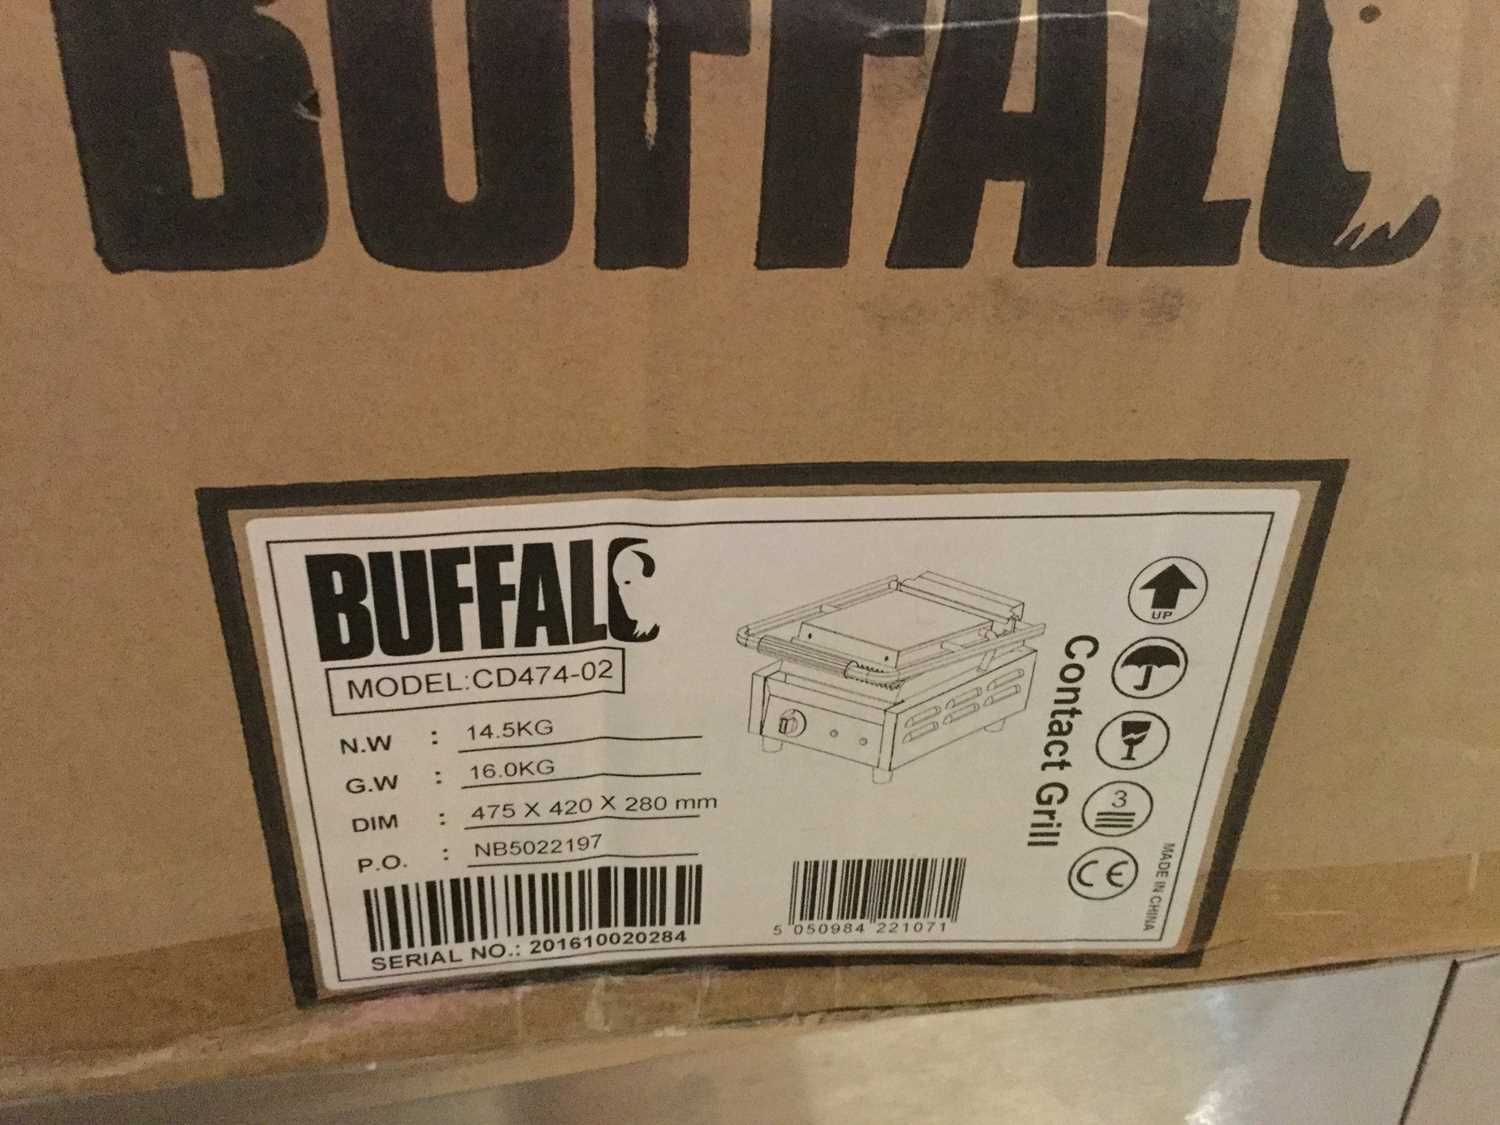 Lot 4 - New Buffalo Contact Grill, model no. CD474-02, unused and in original box